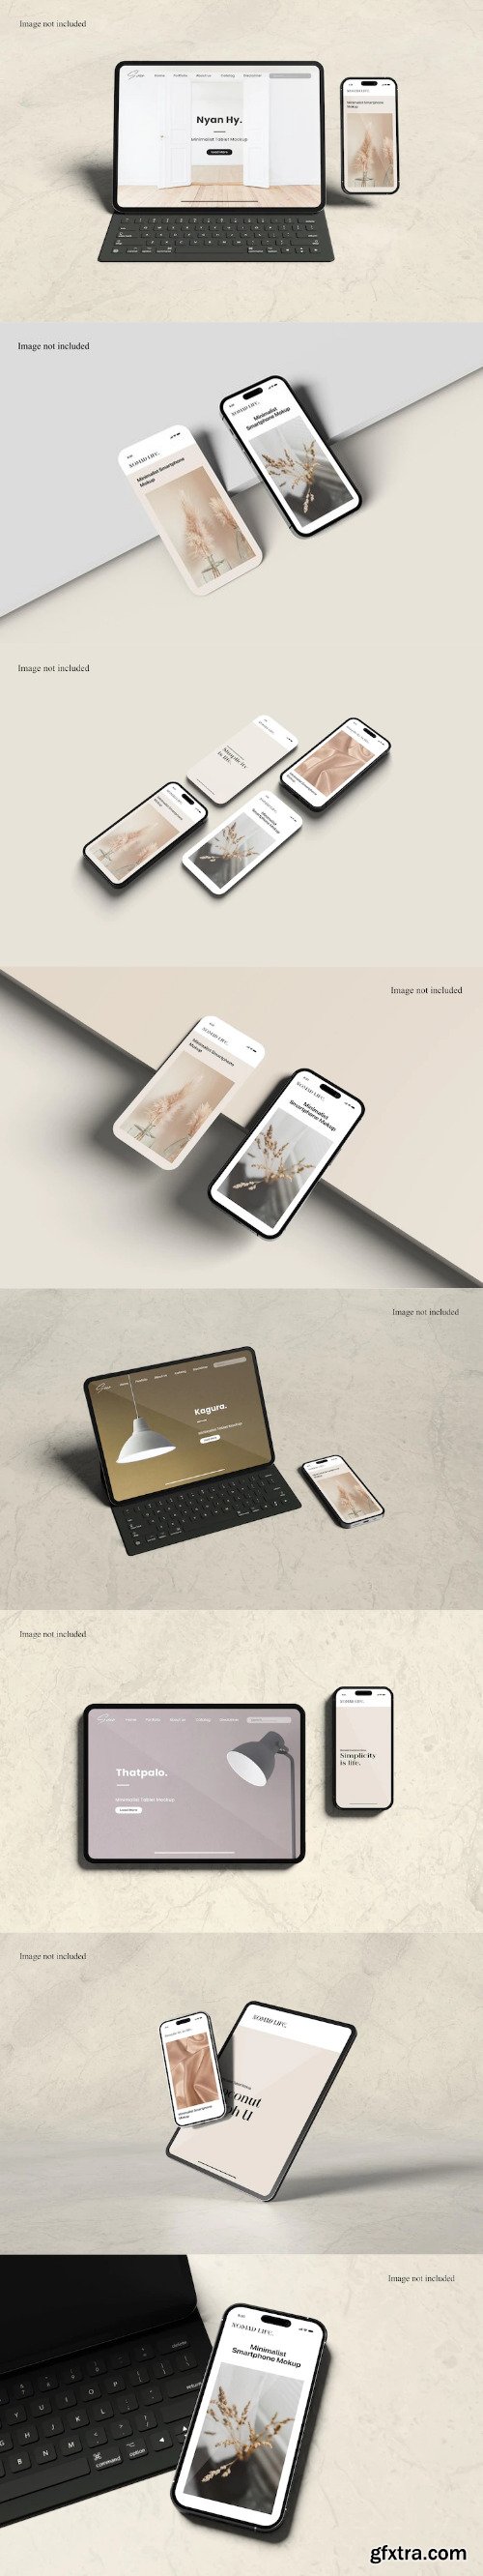 Tablet and smartphone mockup